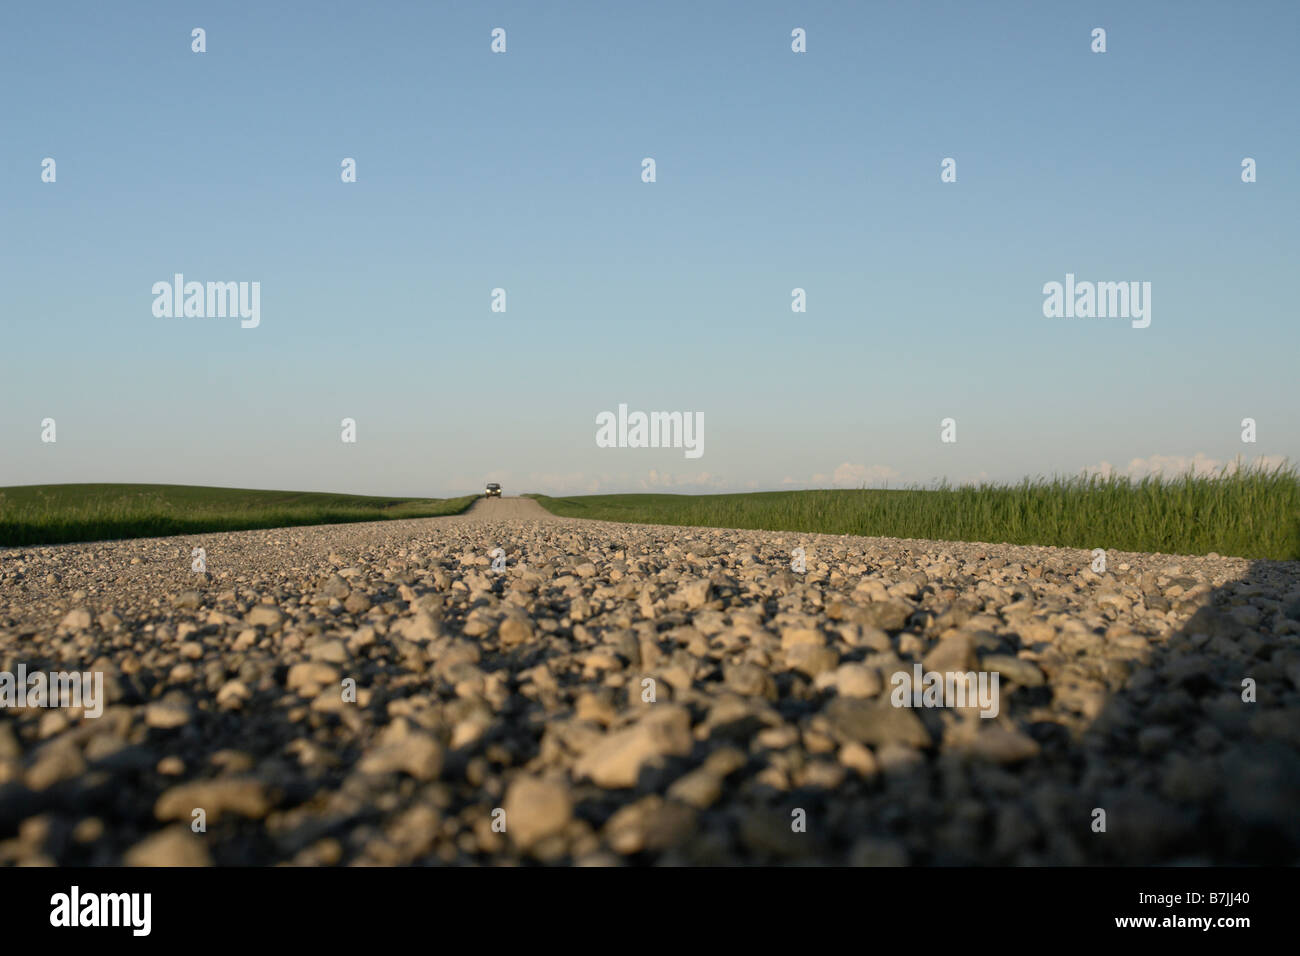 Extreme low angle of gravelled country road with oncoming vehicle; Canada, Manitoba, Erickson Stock Photo